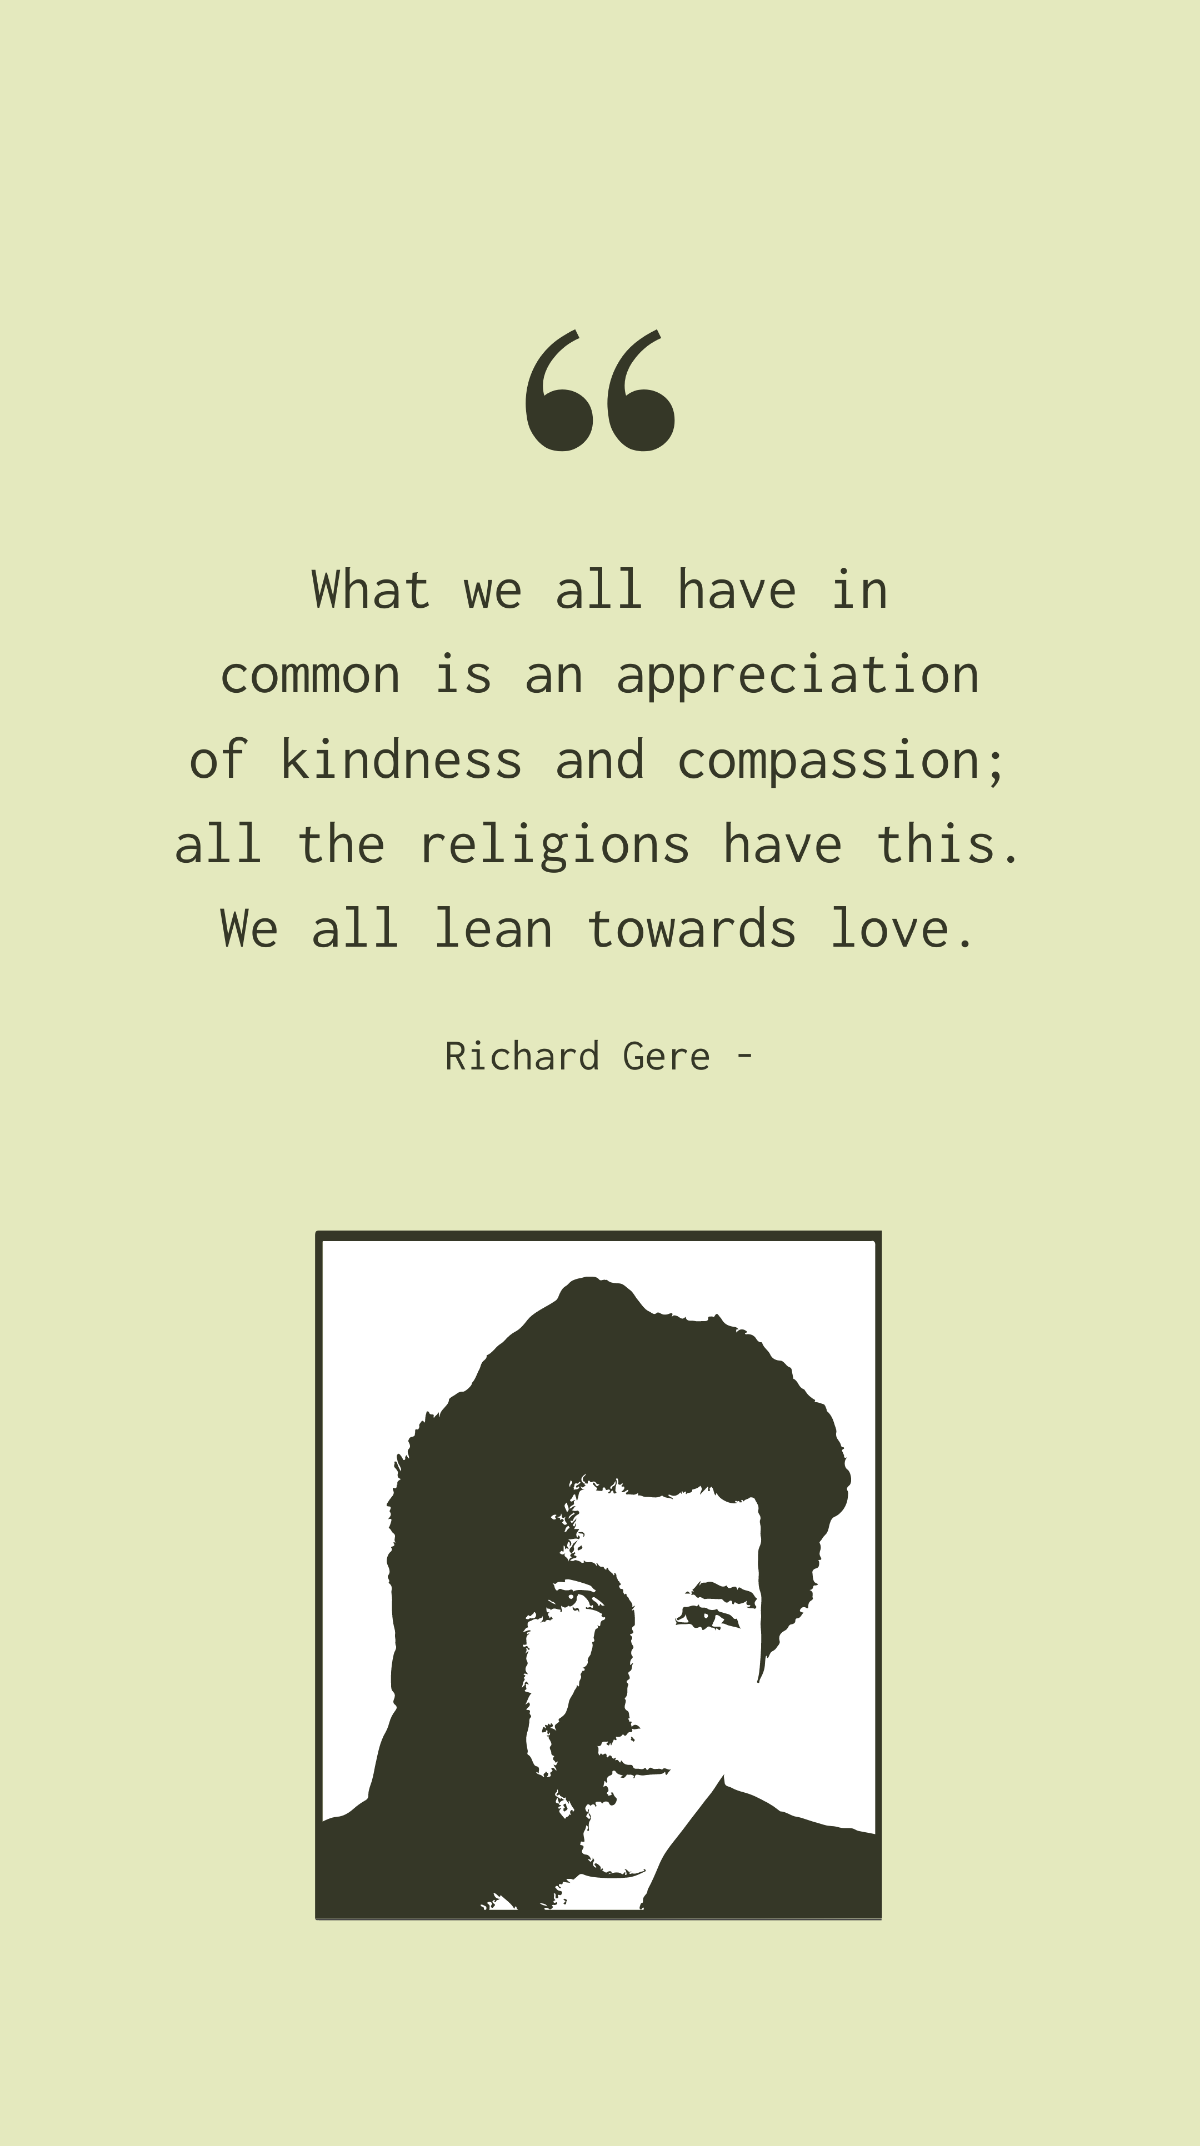 Richard Gere - What we all have in common is an appreciation of kindness and compassion; all the religions have this. We all lean towards love. Template